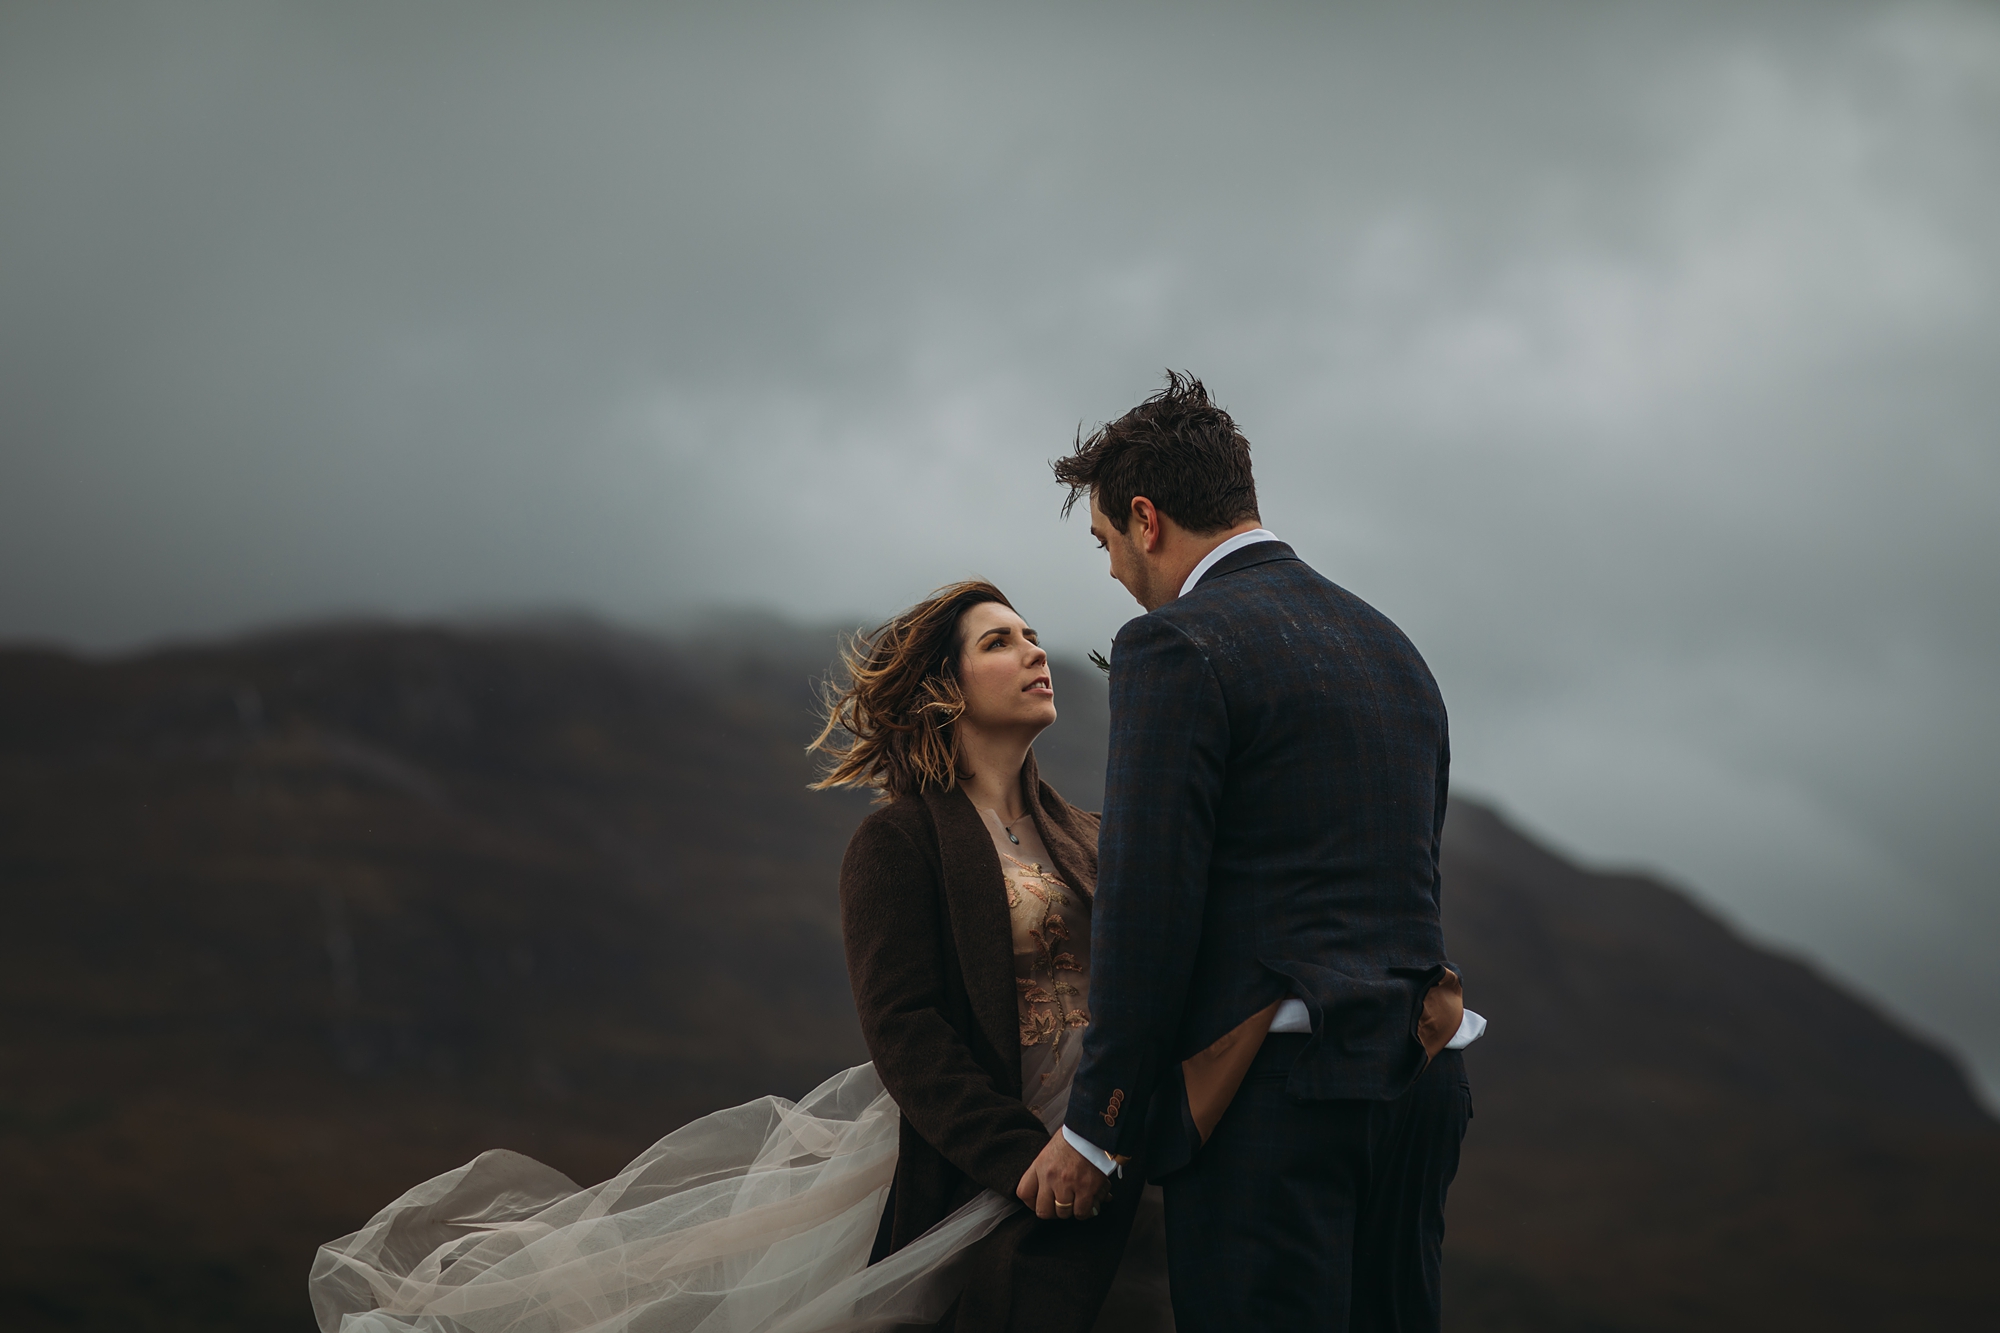 best wedding photographs - A couple gaze at each other in the epic Scottish landscape